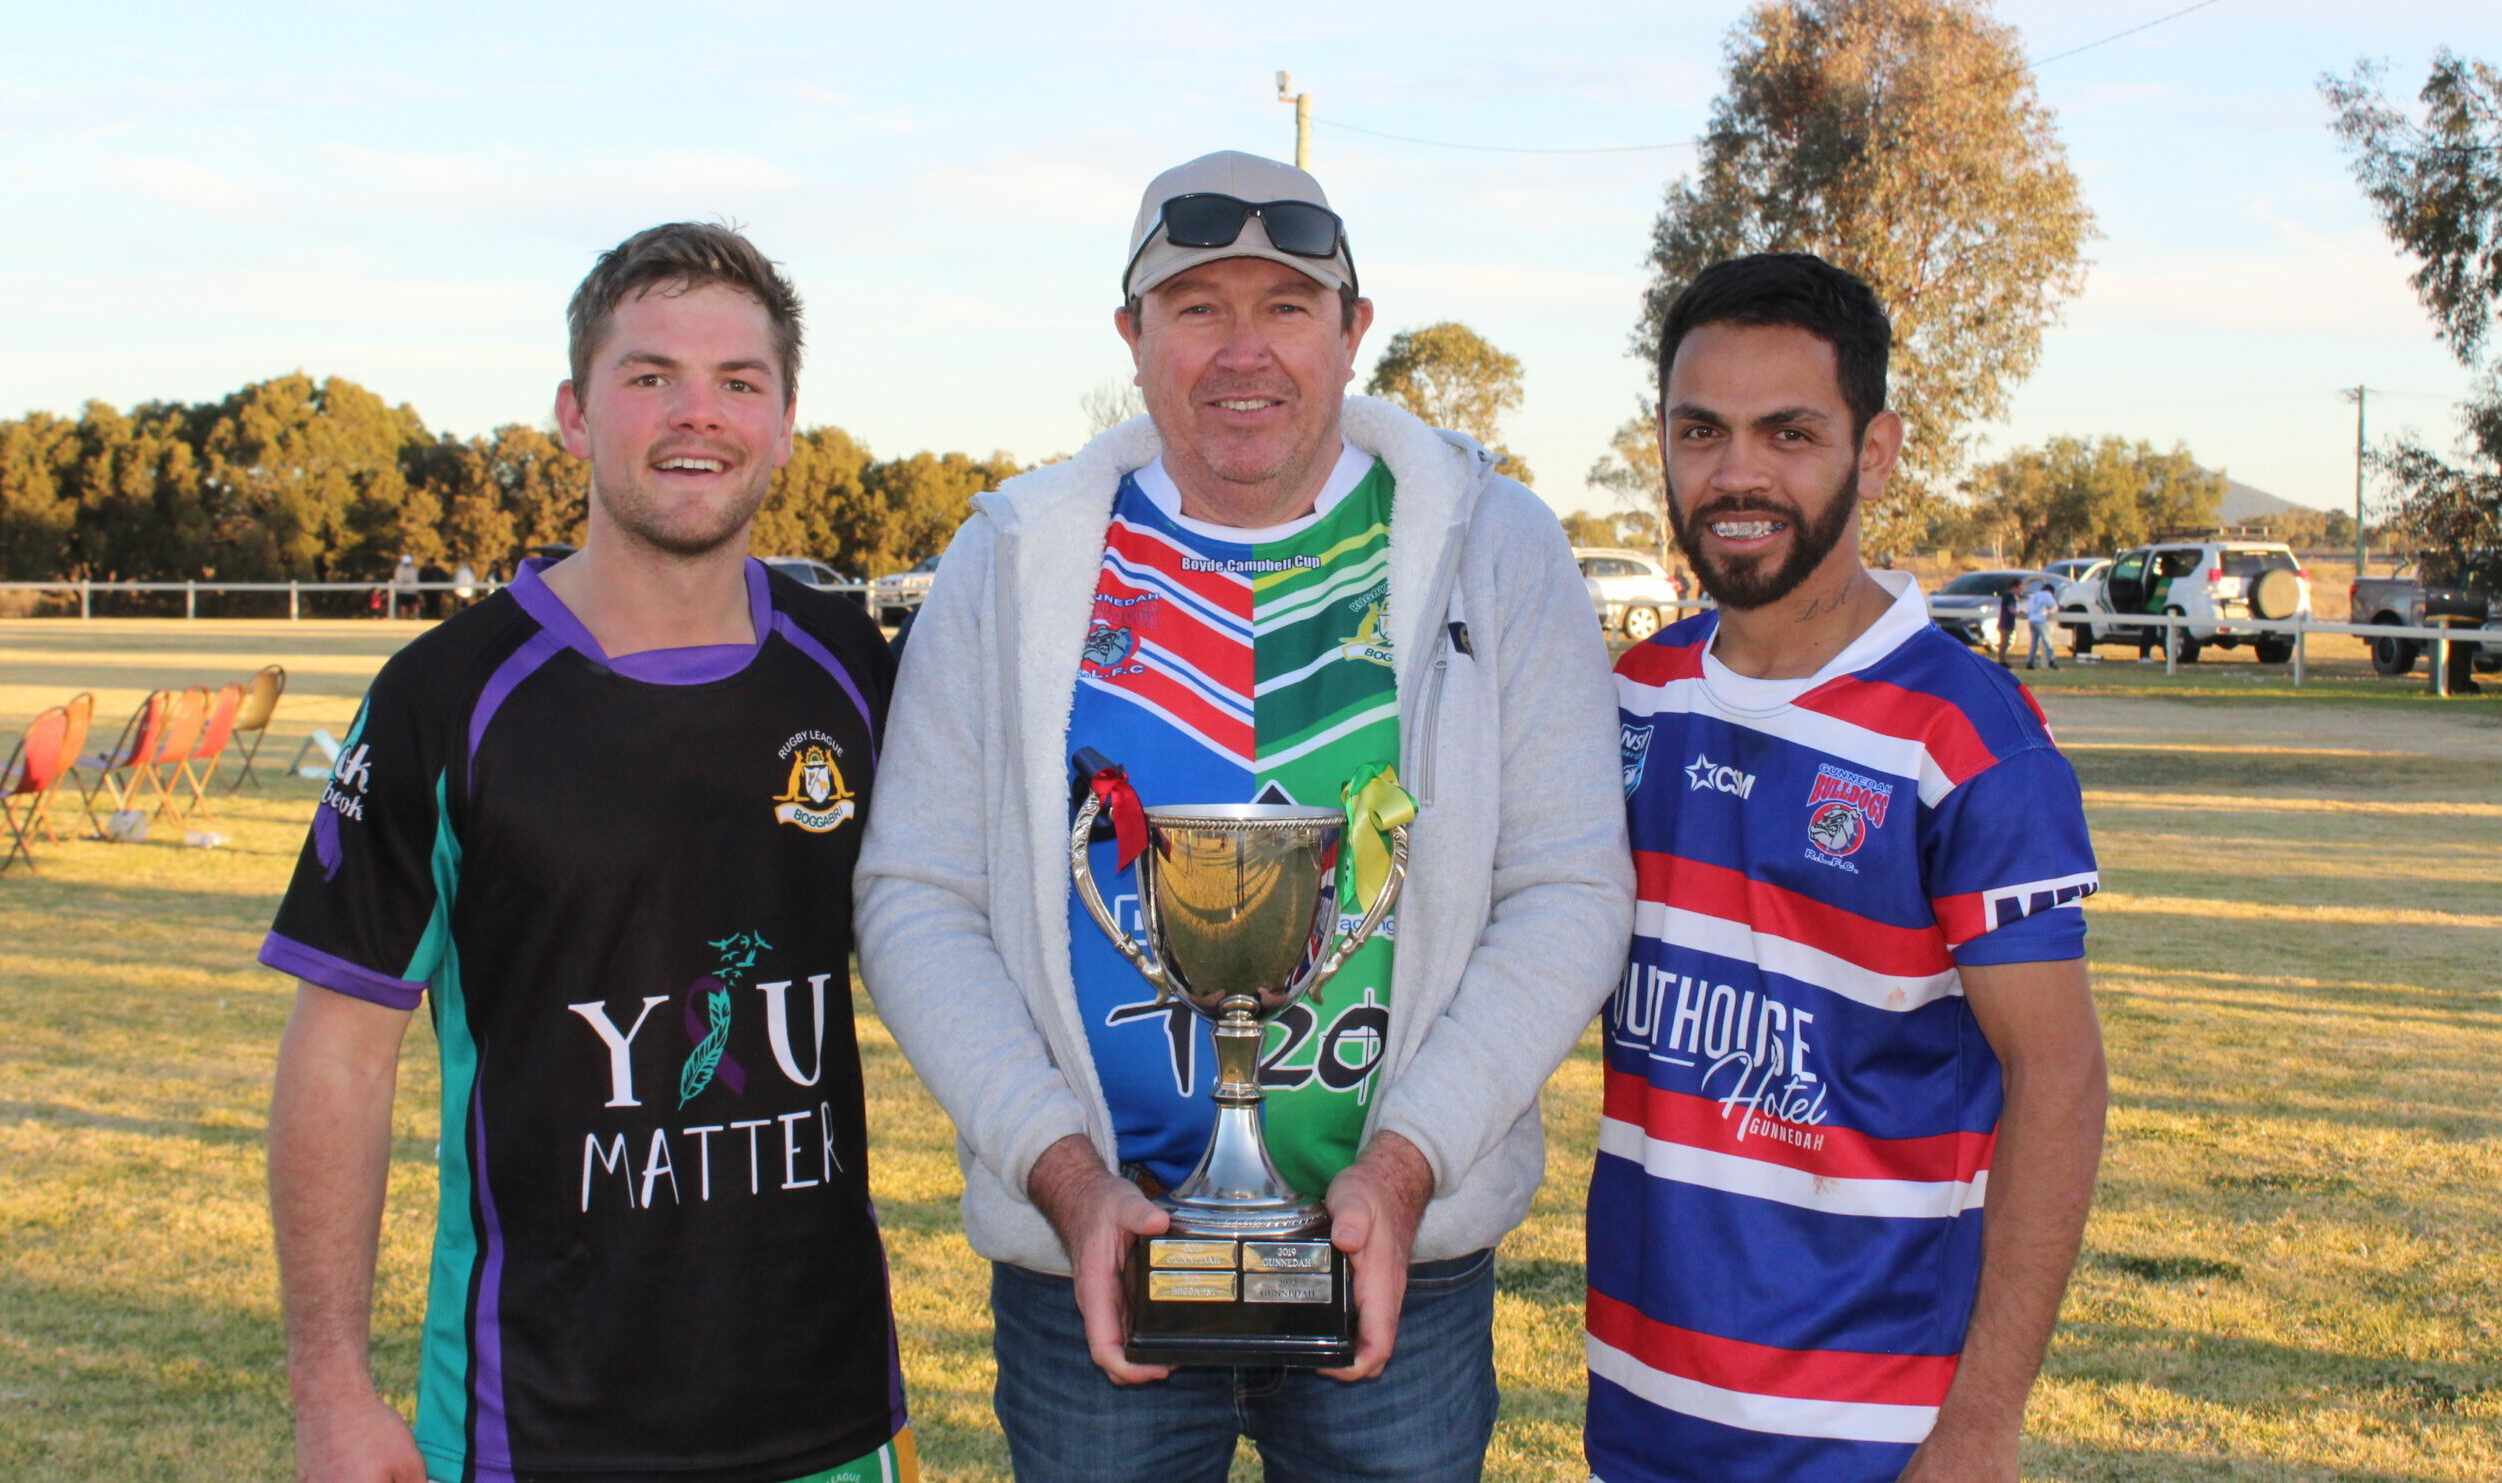 Boyde Campbell Cup match raises crucial funds for an important cause